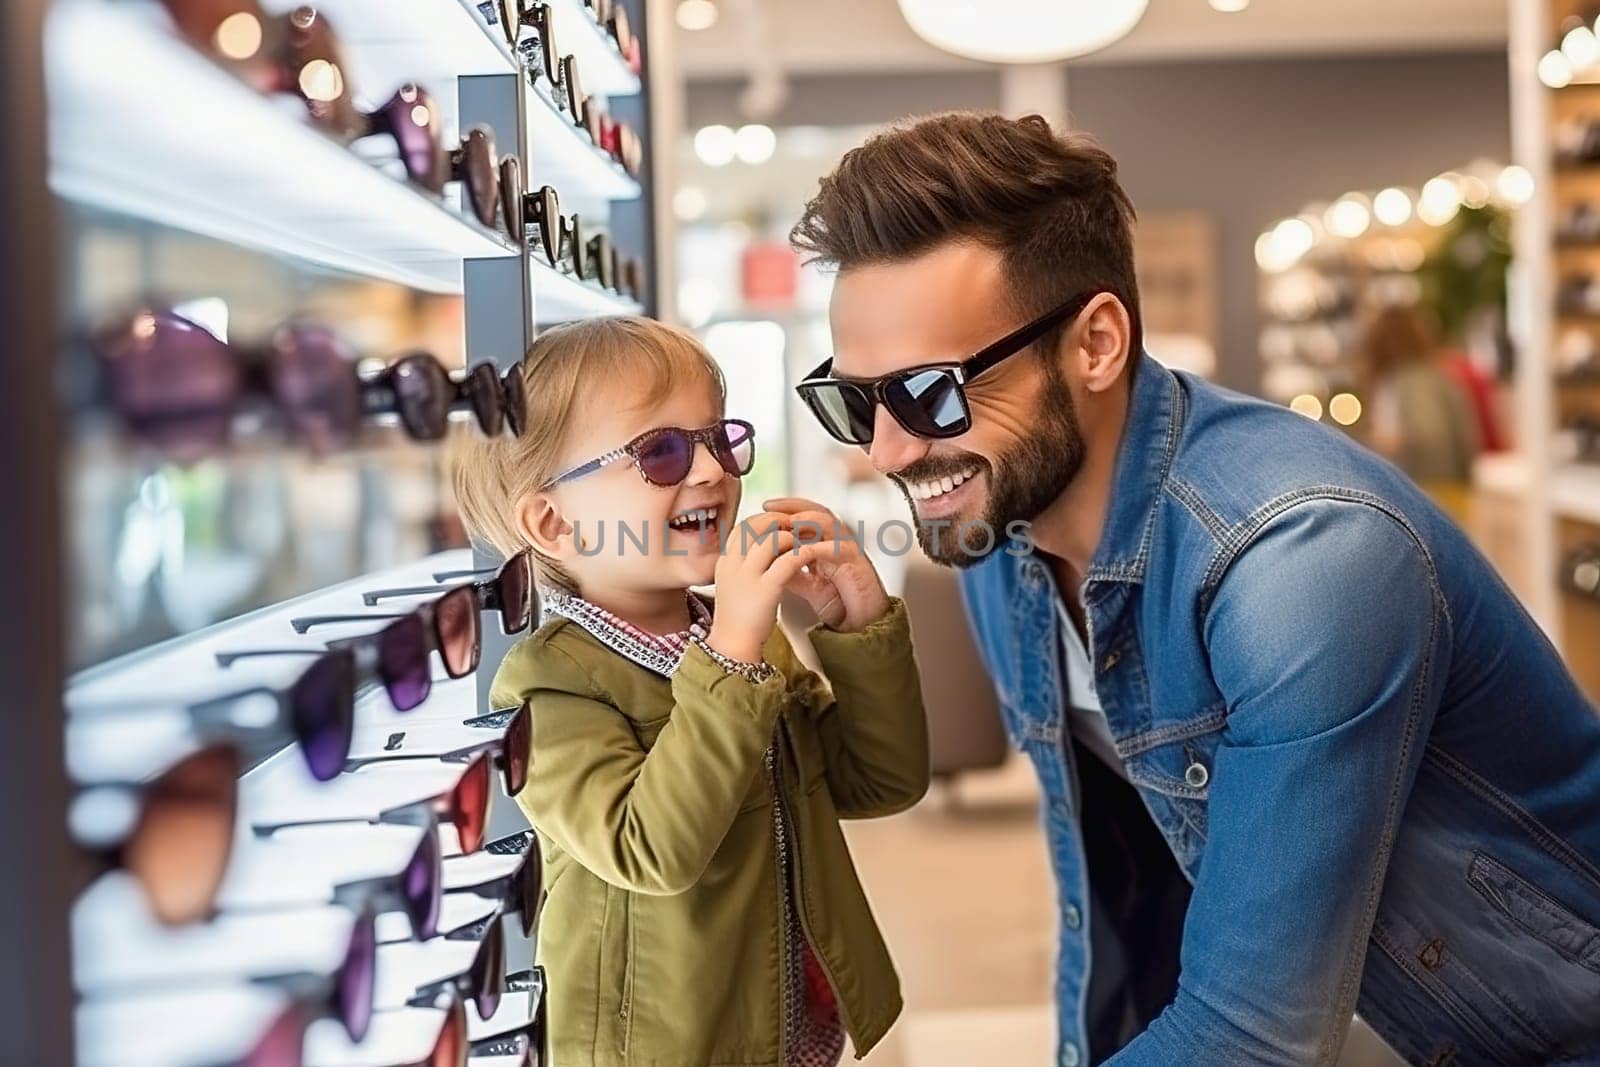 A happy father picks out his son's sunglasses. by Yurich32